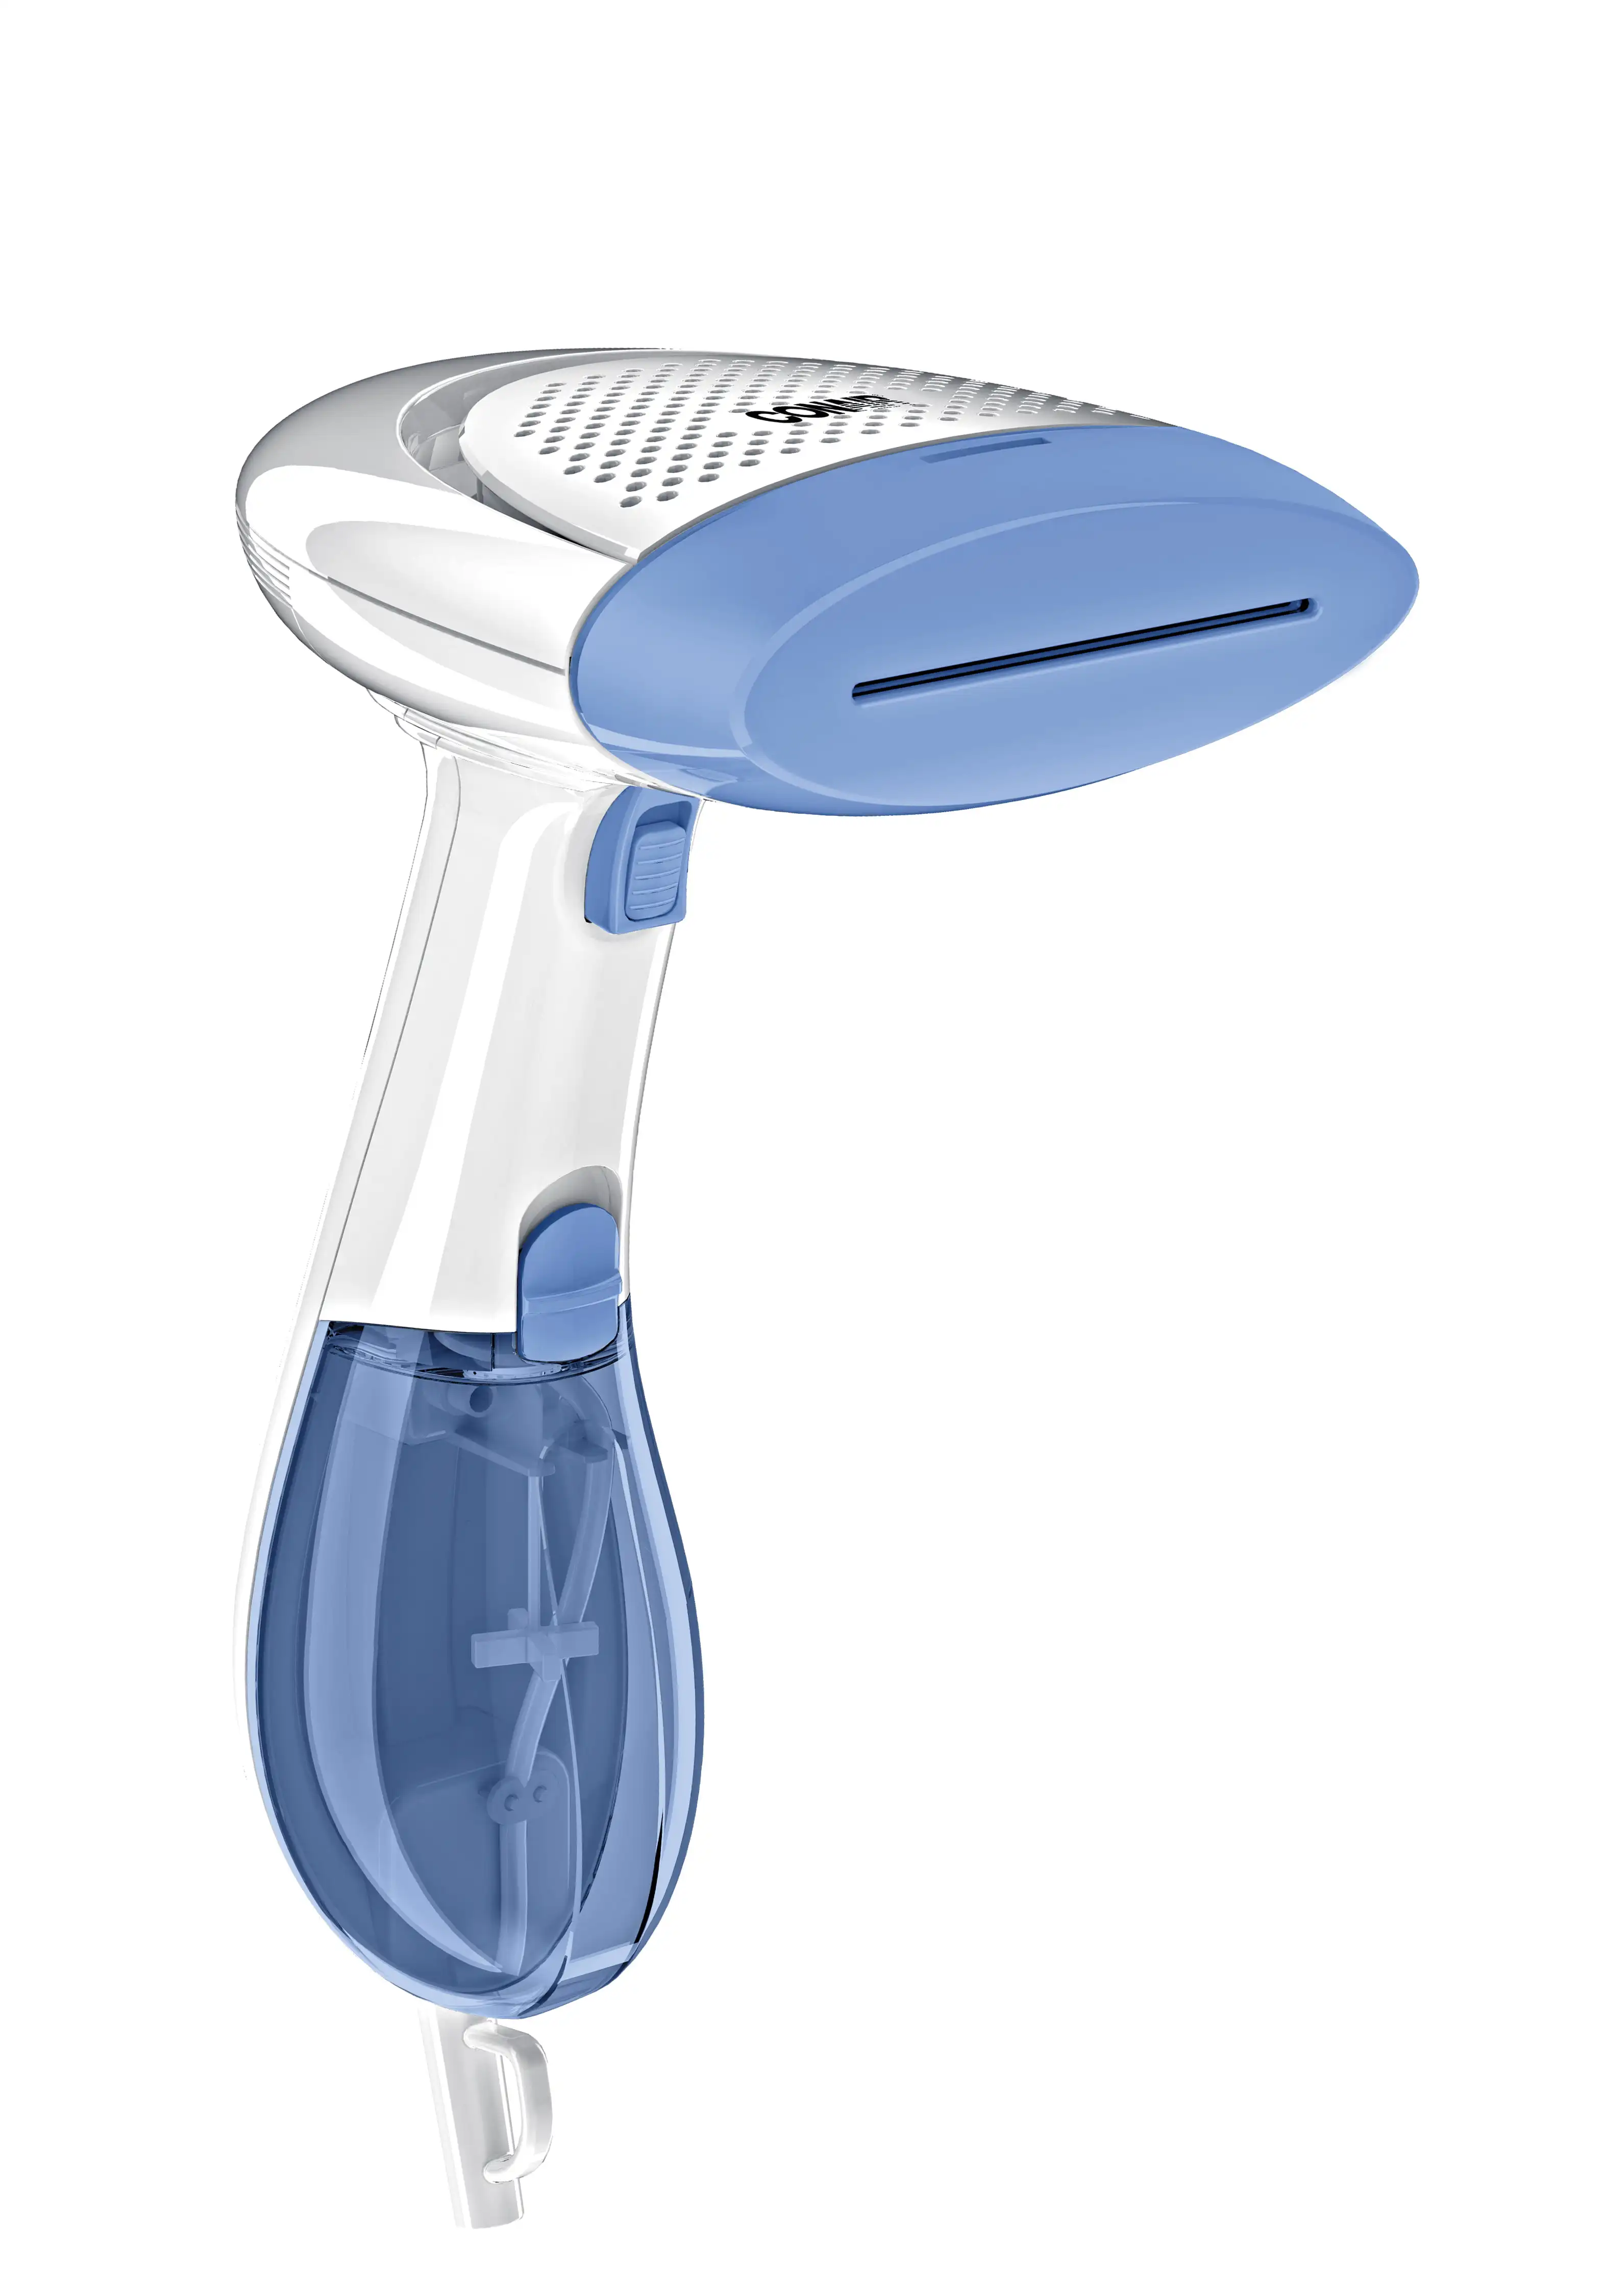 

ExtremeSteam Hand Held Fabric Steamer with Dual Heat, White/Blue, Model GS237X